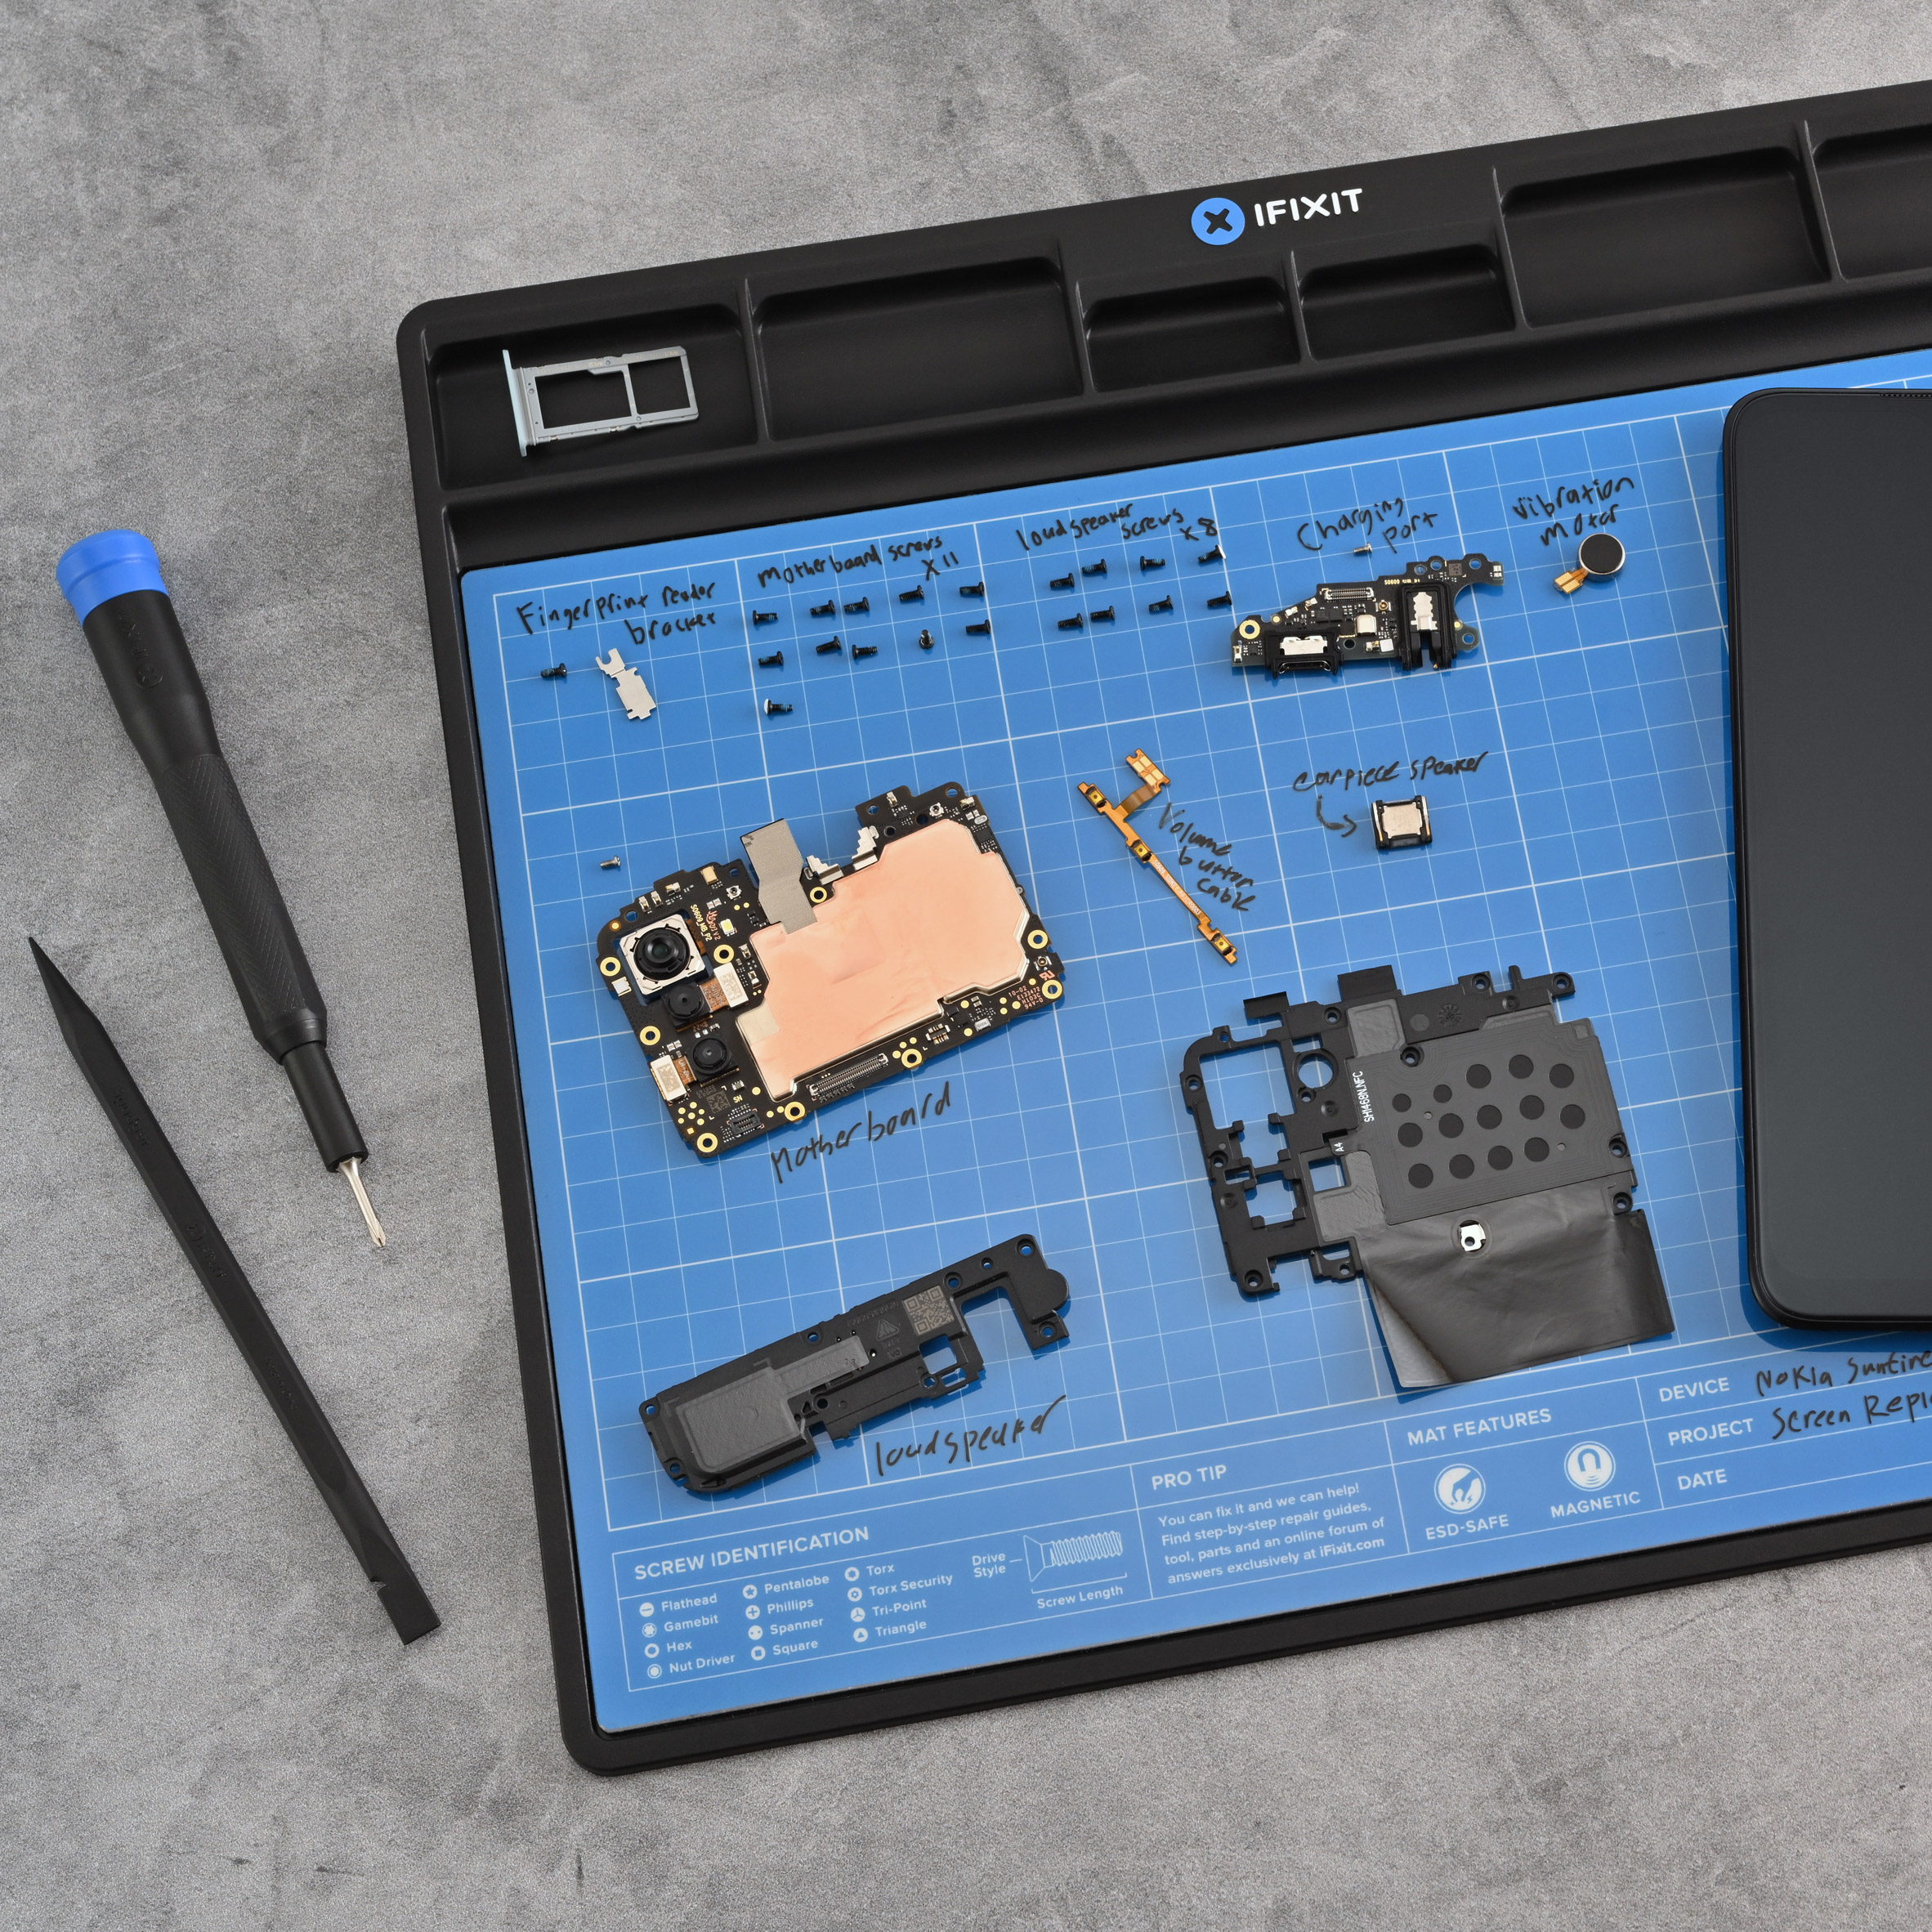 Nokia launches DIY repairable budget Android phone, Nokia